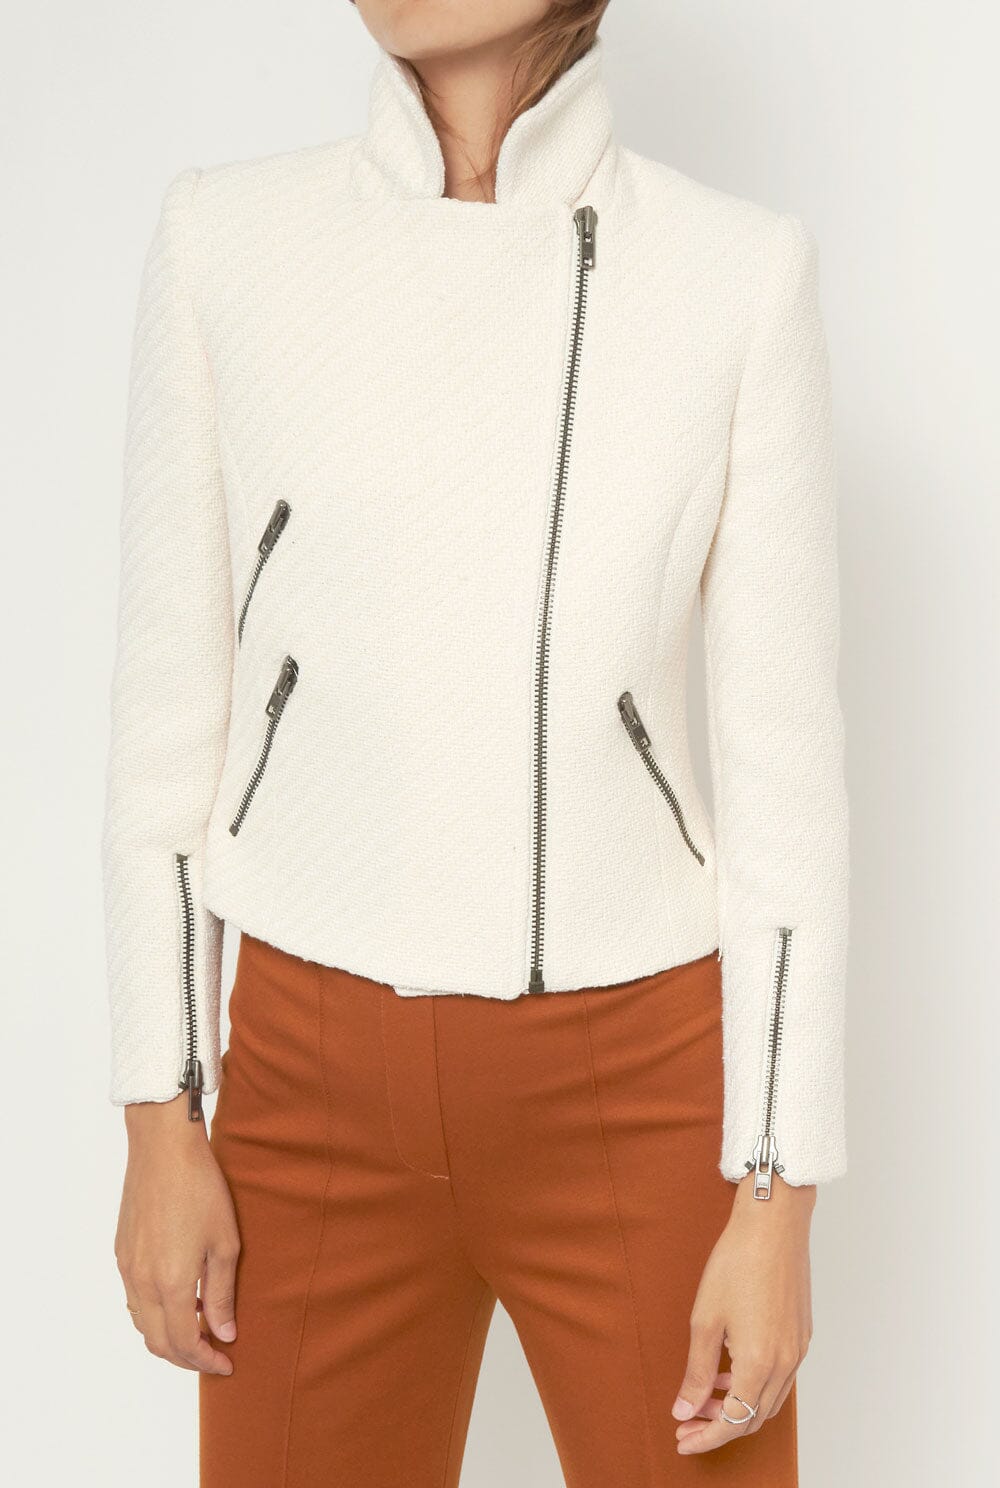 WHITE COTTON BLEND JACKET PERFECTO BLANCO Jackets The Extreme Collection 